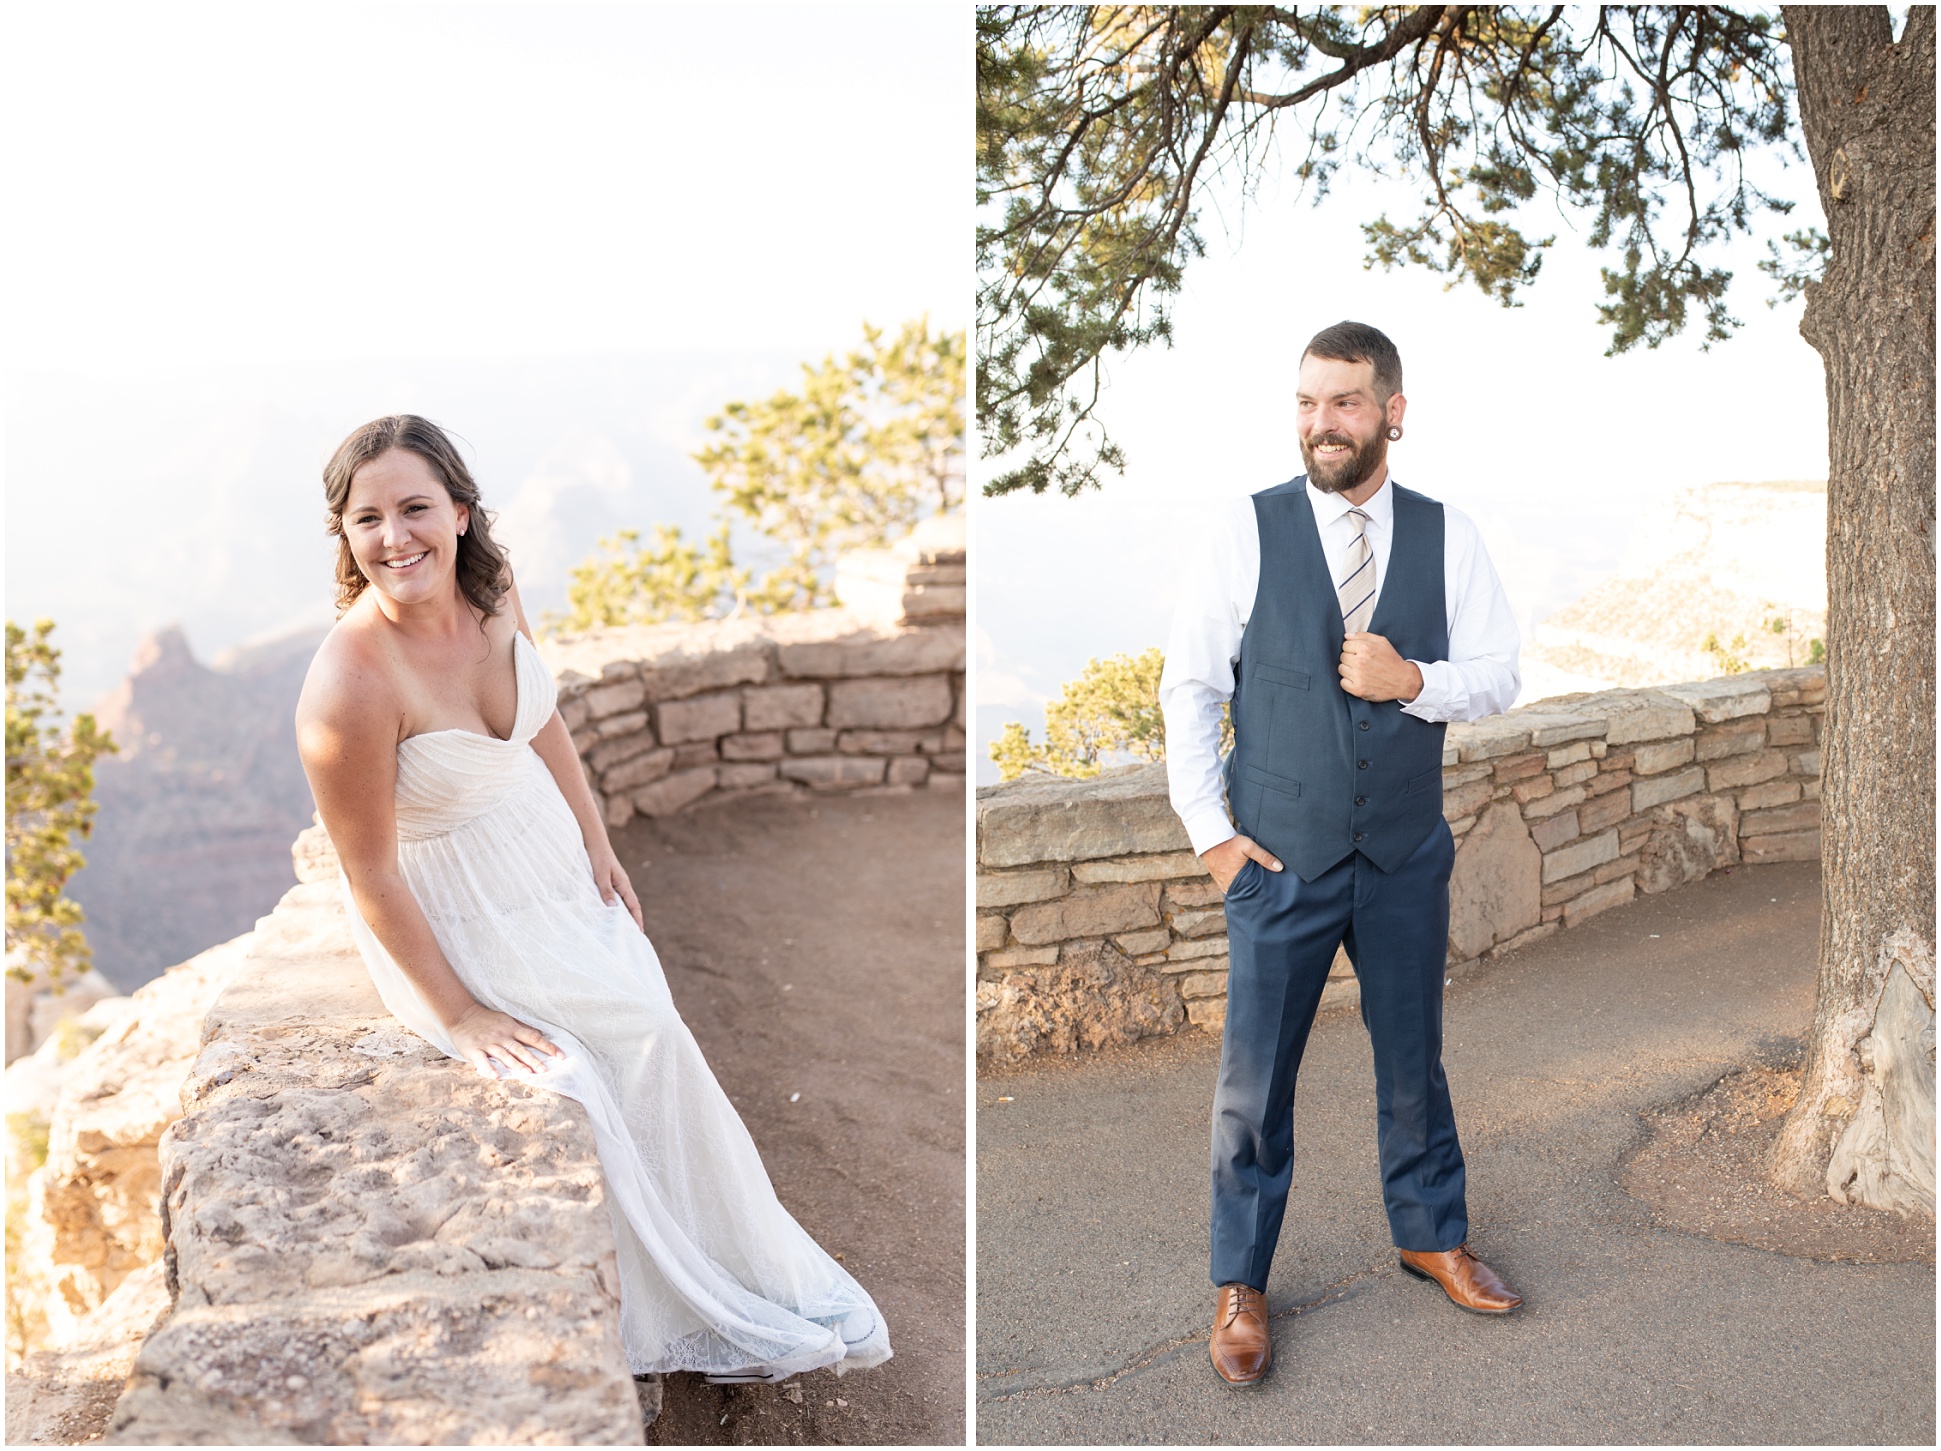 Two images. Left is bride, right is groom. Both are standing at the South Rim of the Grand Canyon